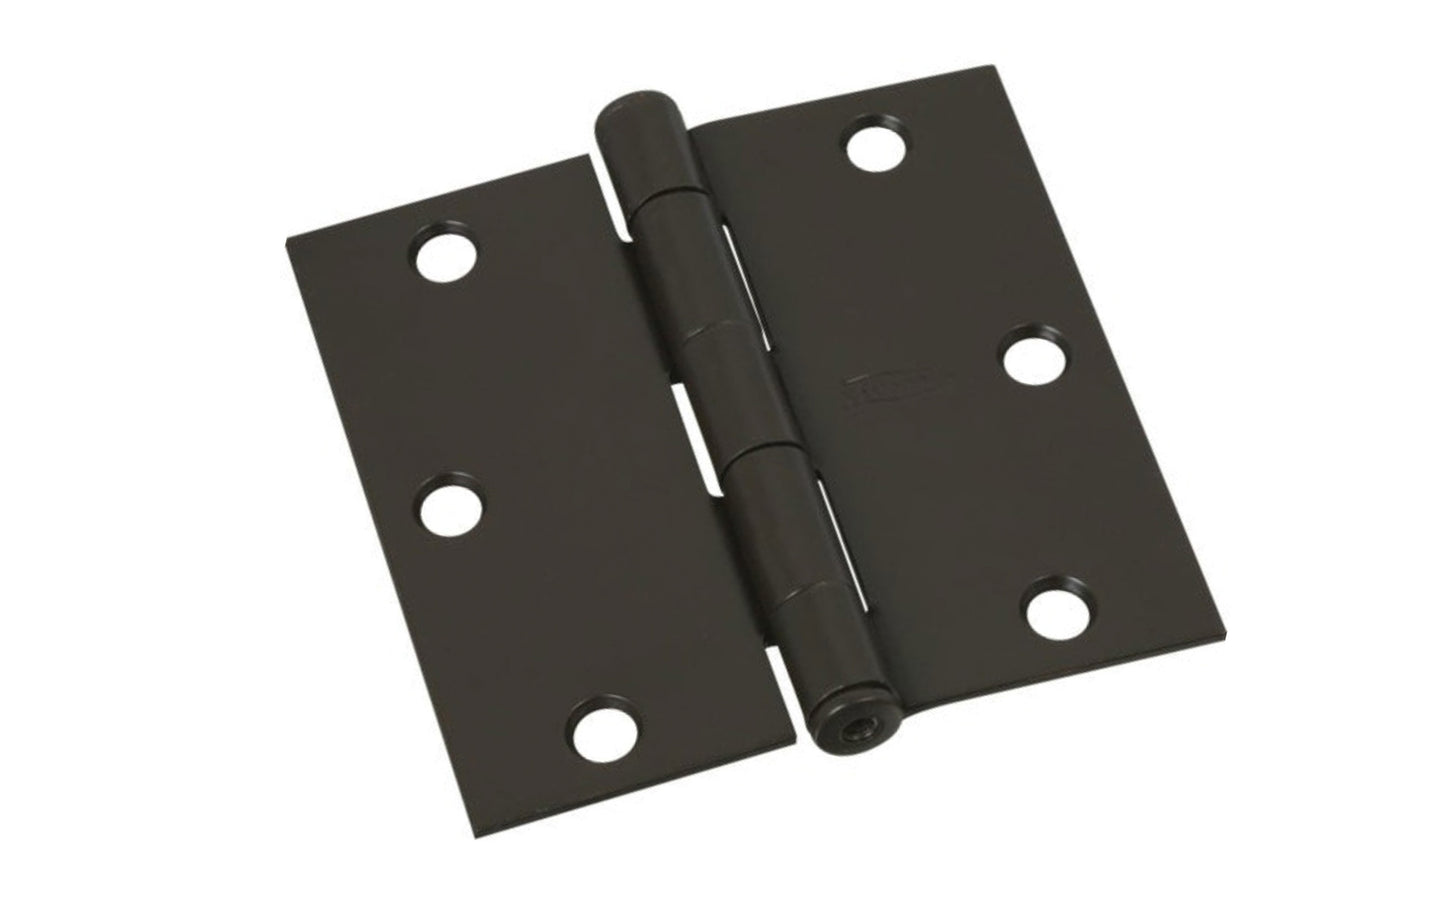 3-1/2" Oil Rubbed Bronze Door Hinge with square corners & a removable pin. Oil rubbed bronze finish on steel material. Countersunk holes. Includes flat head screws. 3-1/2" x 3-1/2" door hinge size. Five knuckle, full mortise design. National Hardware Model No. N830-203. 886780009439